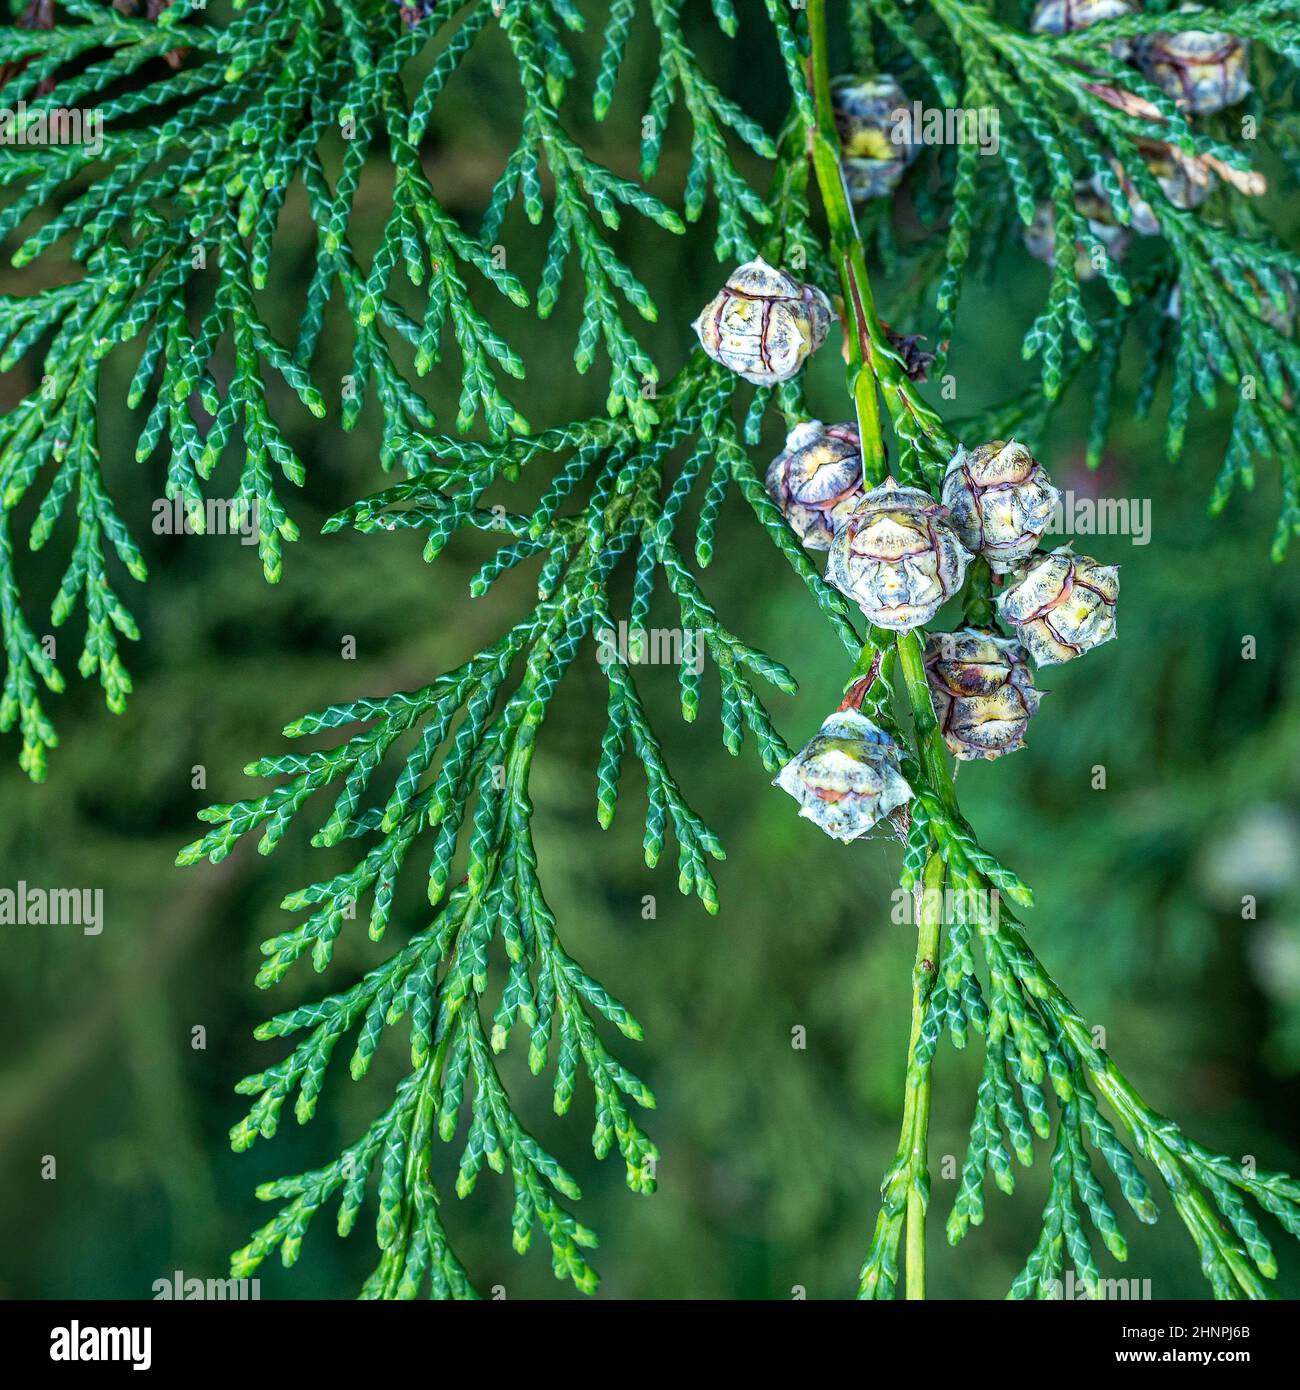 Closeup of the green leaves and tiny cones of a Lawson cypress tree Chamaecyparis lawsoniana Stock Photo